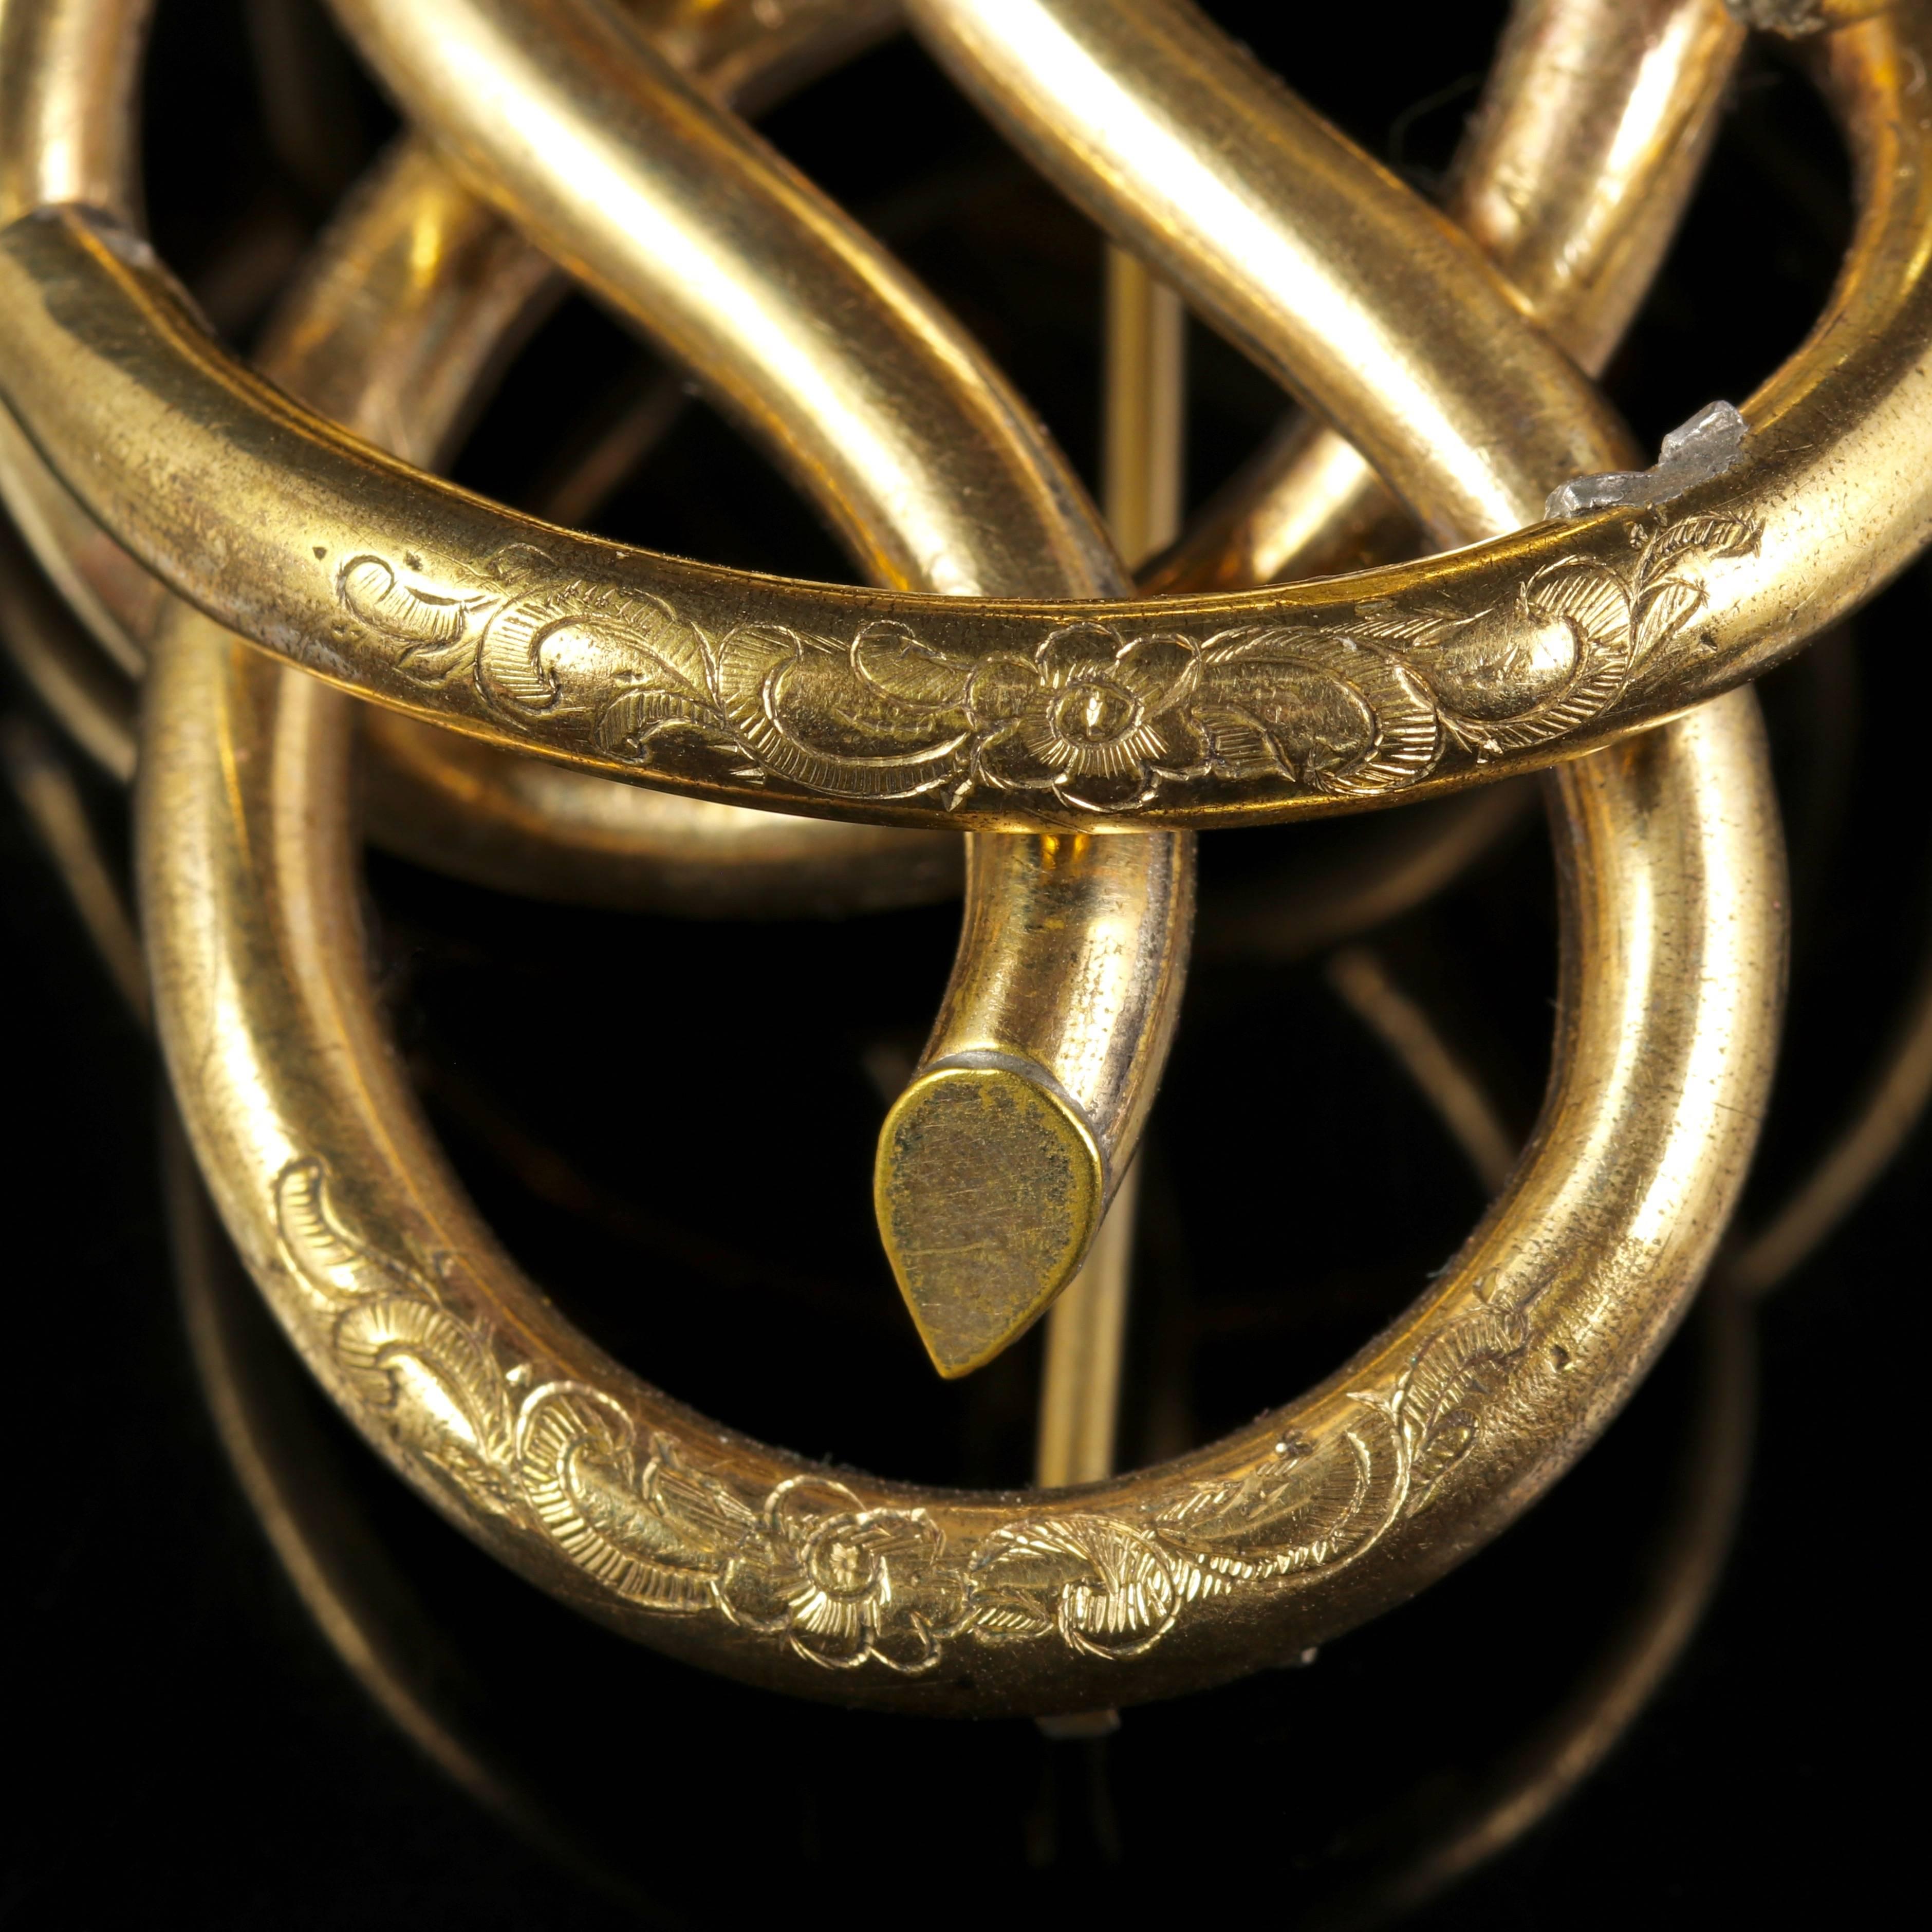 This fabulous Victorian Knot brooch is Circa 1880.

The Brooch boasts stunning workmanship throughout and has a beautiful twisting rope design. 

Set in Base Metal with a smooth Gold finish.

Complete with a beautiful engraved outer gallery which